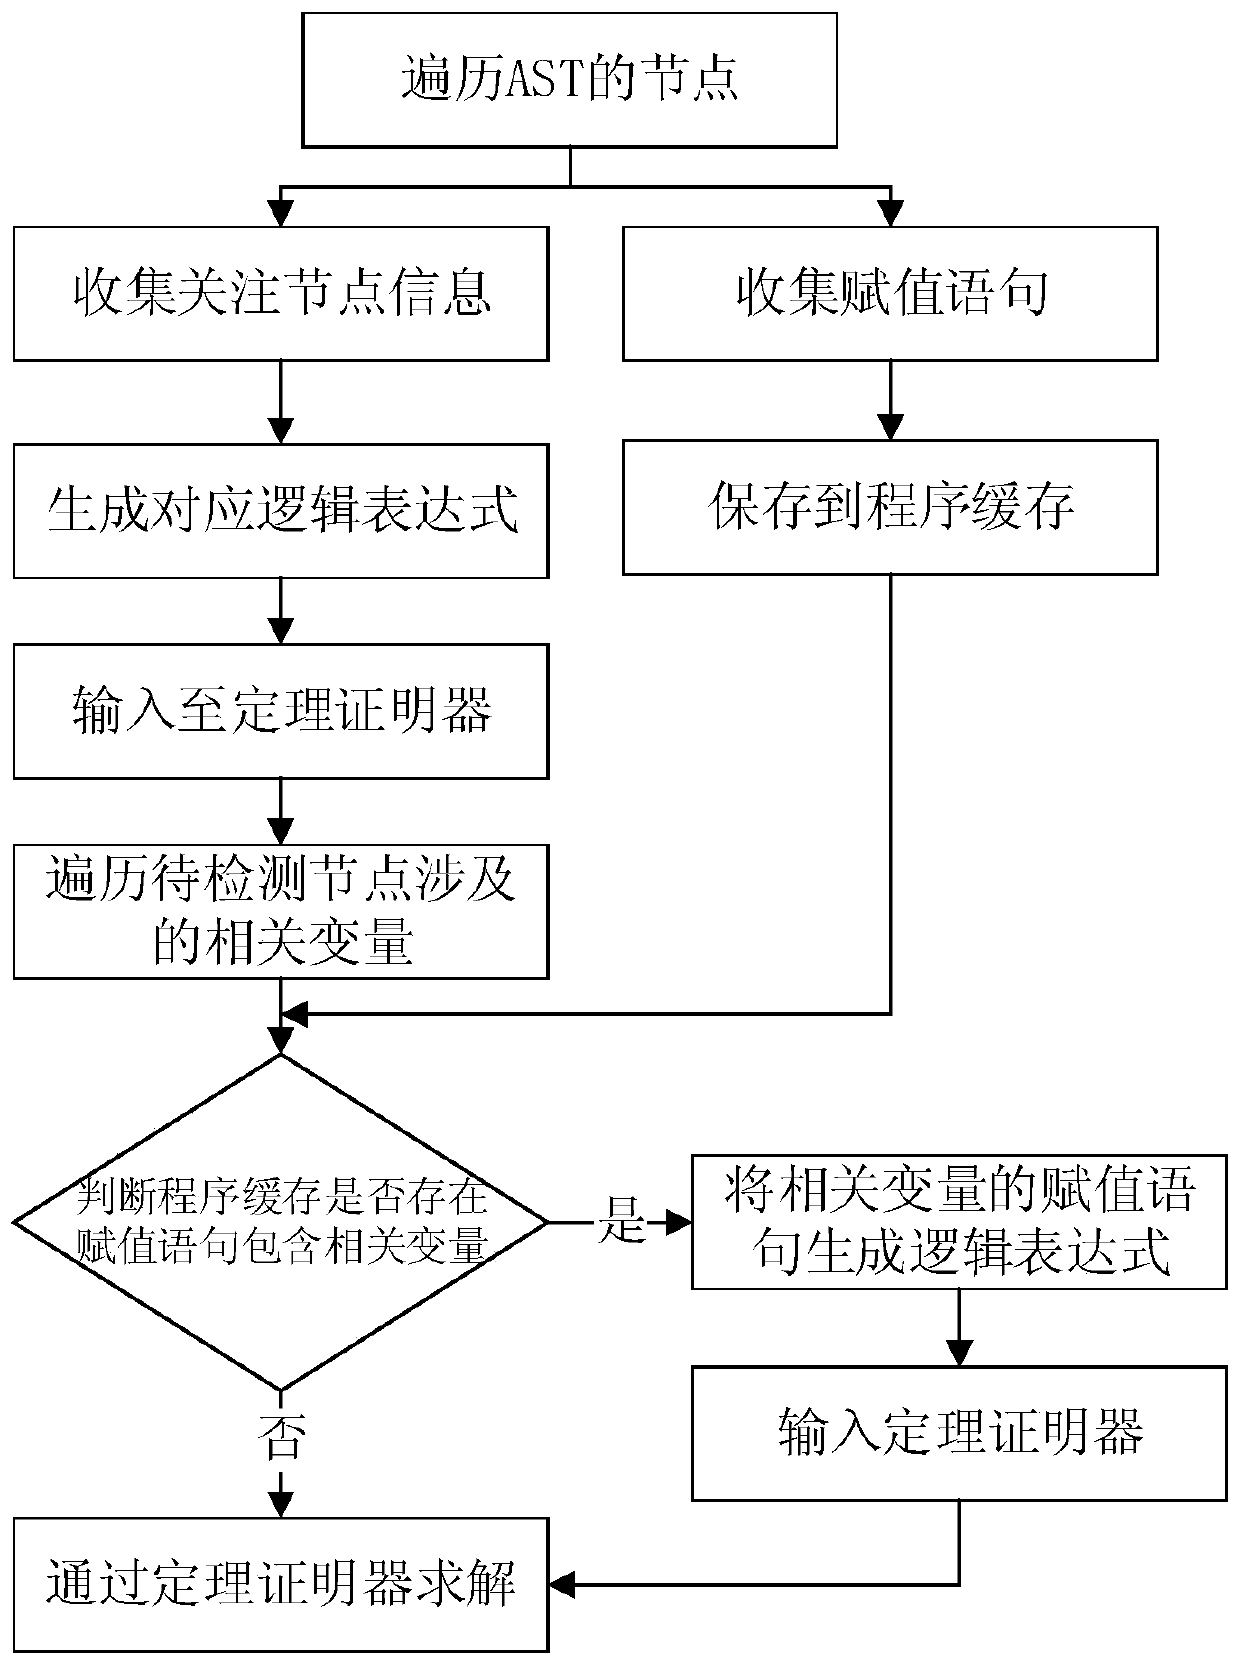 Local sensitive program analysis method based on abstract syntax tree and theorem proof